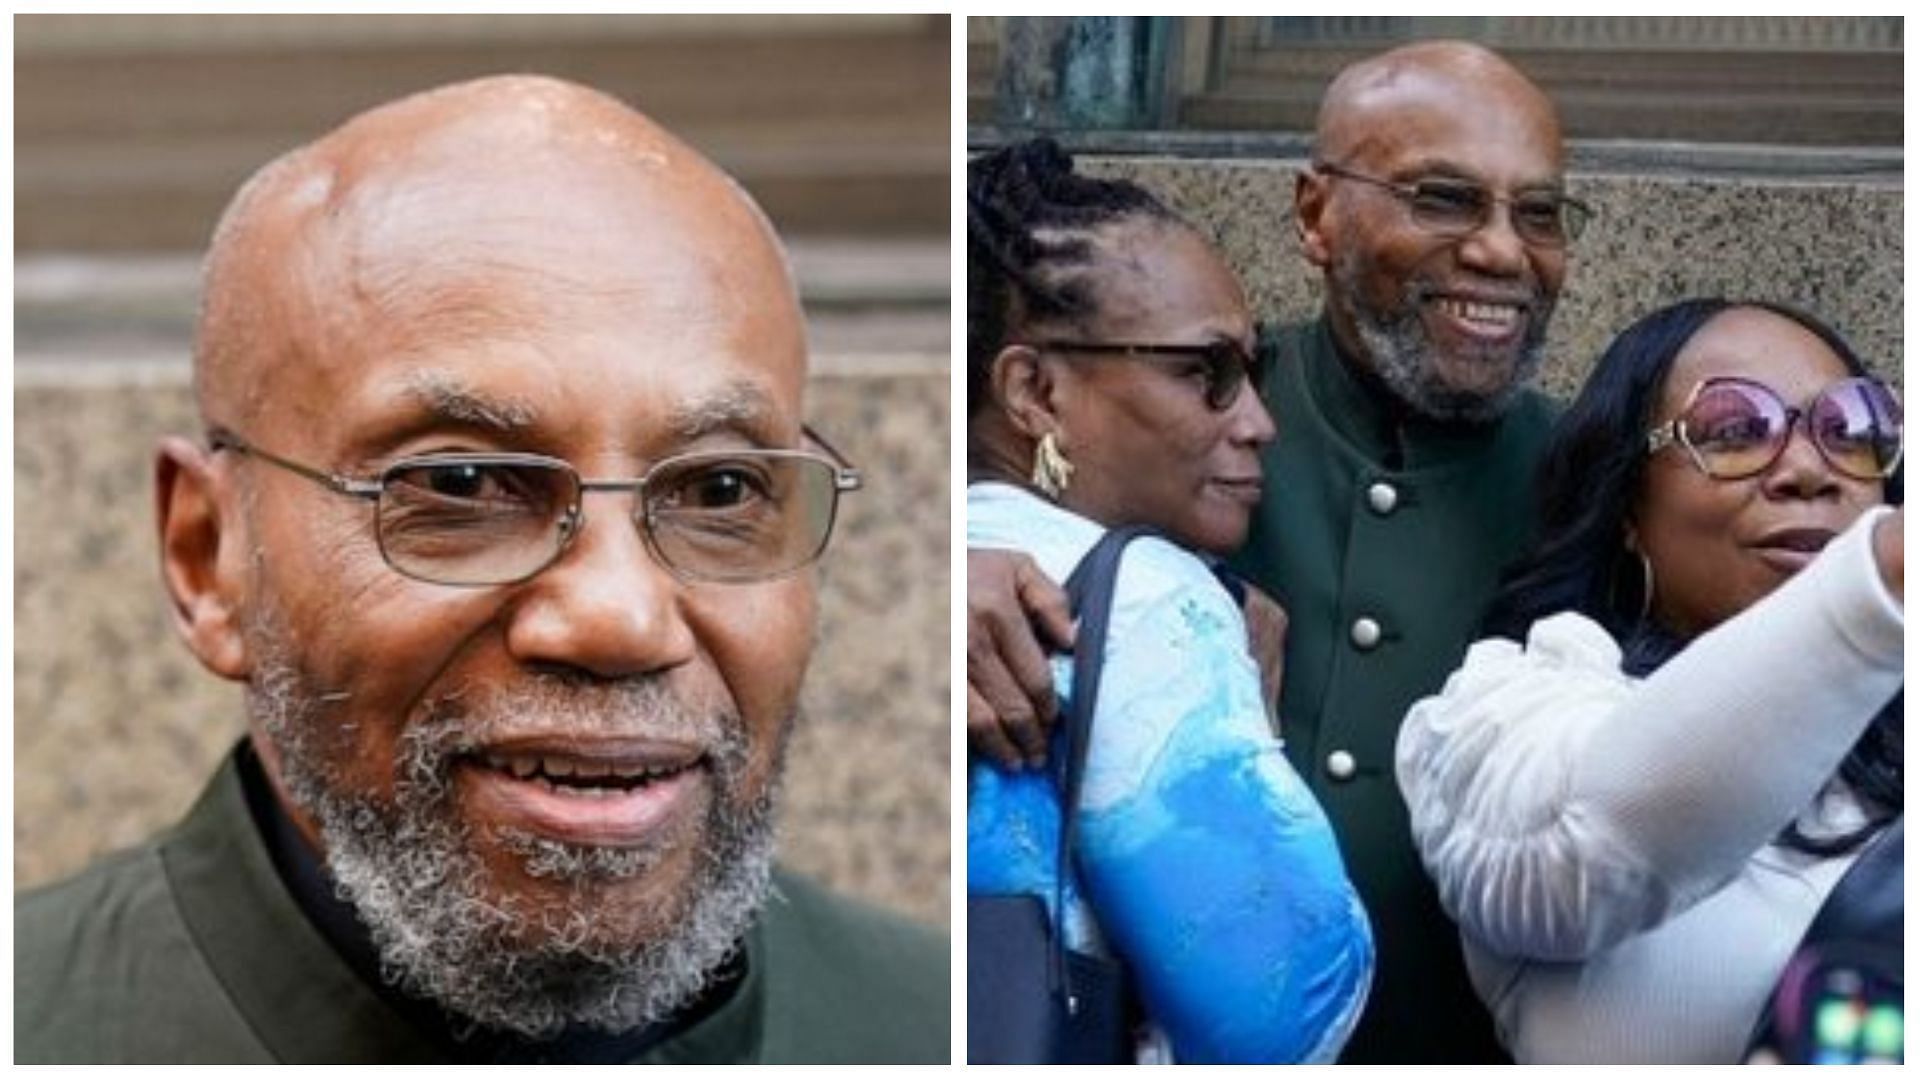 NYC Settles With Two Men Exonerated In The Assassination Of Malcolm X Paying Them $36Mil.